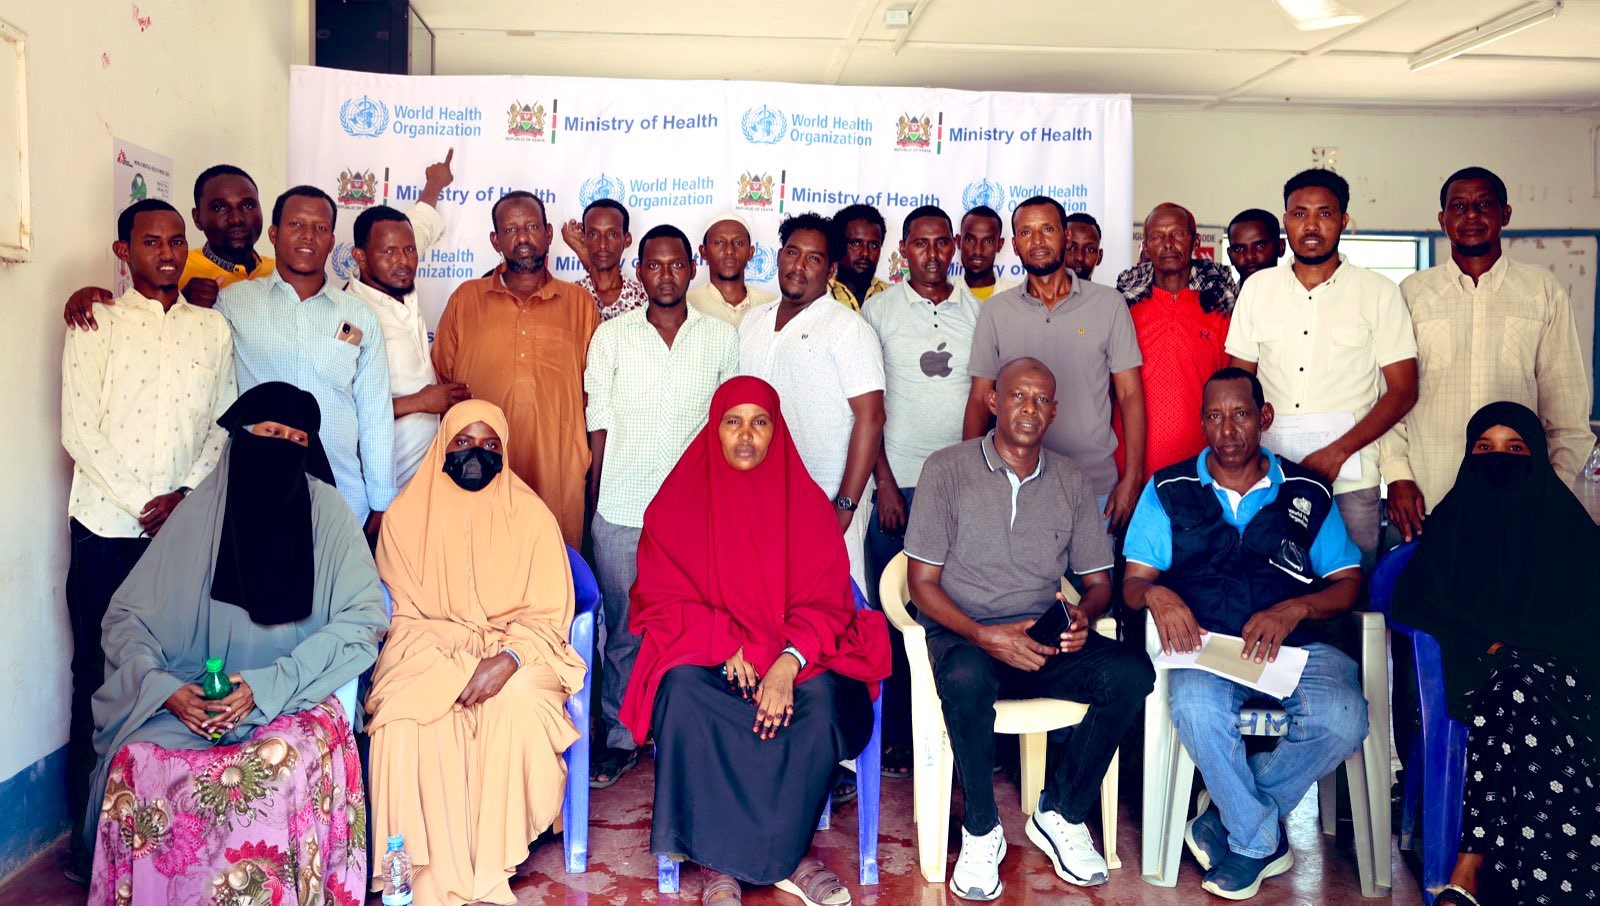 Ministry of Health, Garissa County, and WHO Launch Comprehensive Cholera Response Training in Kenyan Refugee Camps